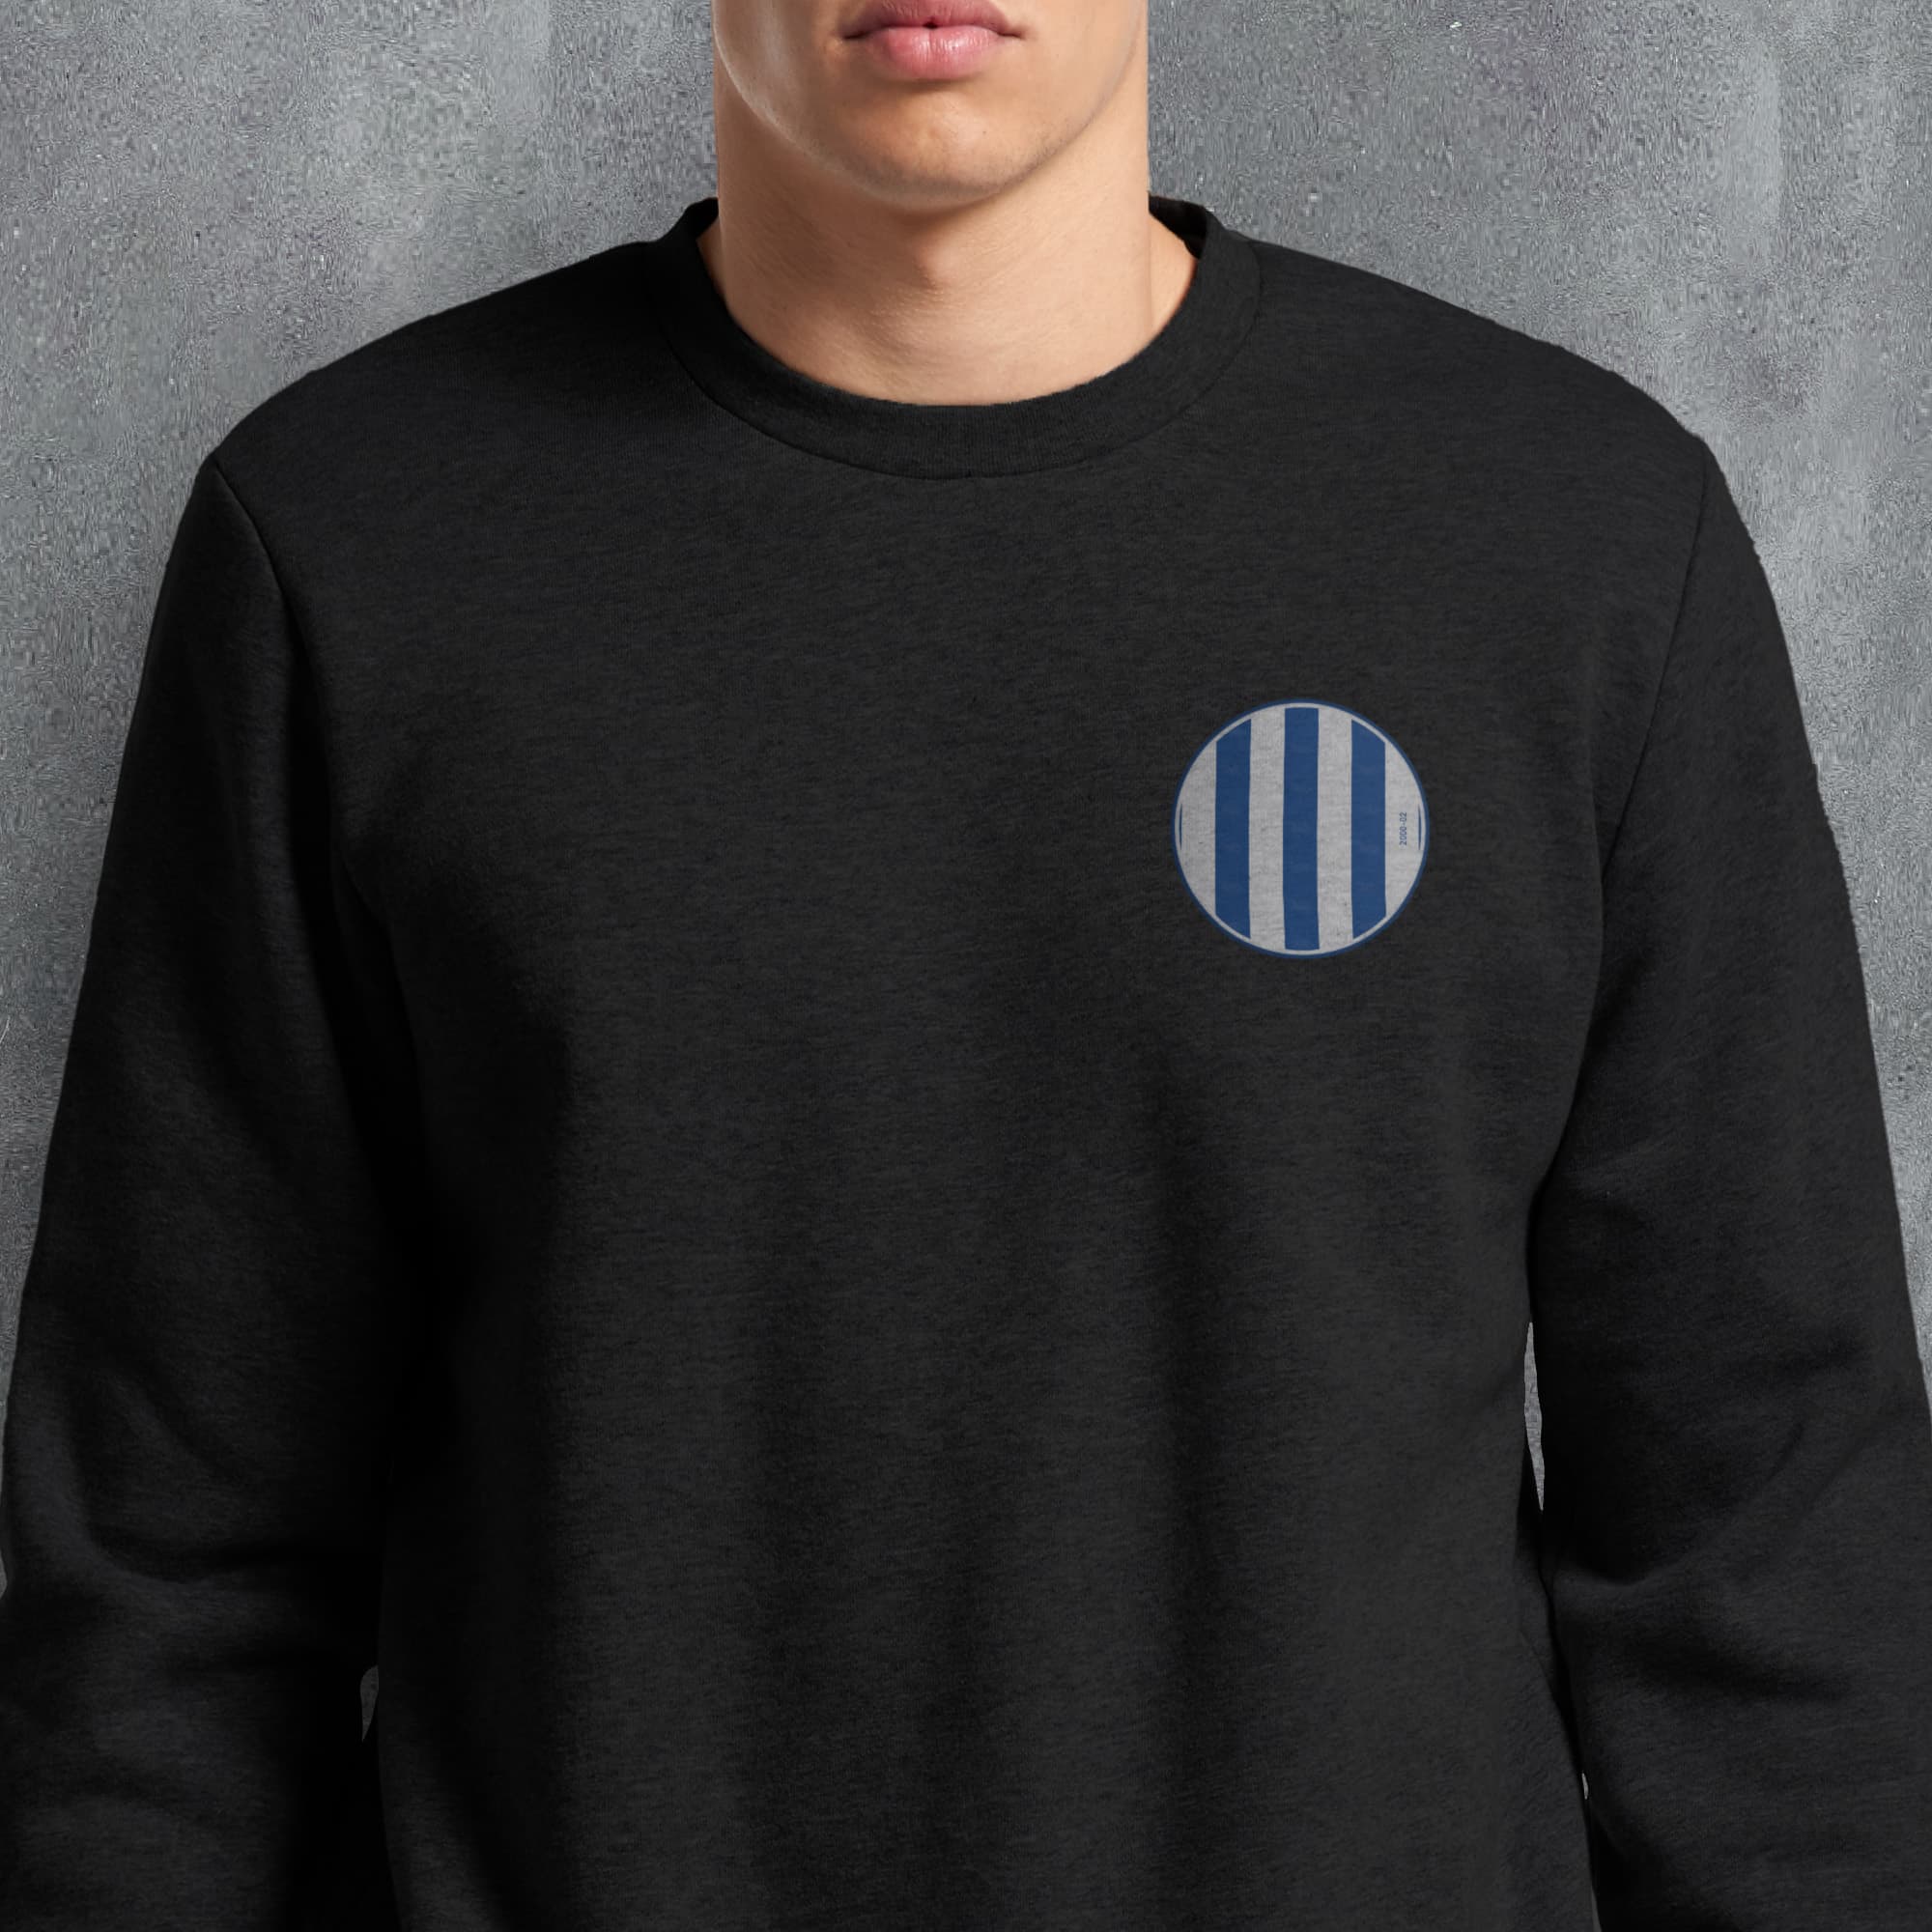 a man wearing a black sweatshirt with a blue circle on the front